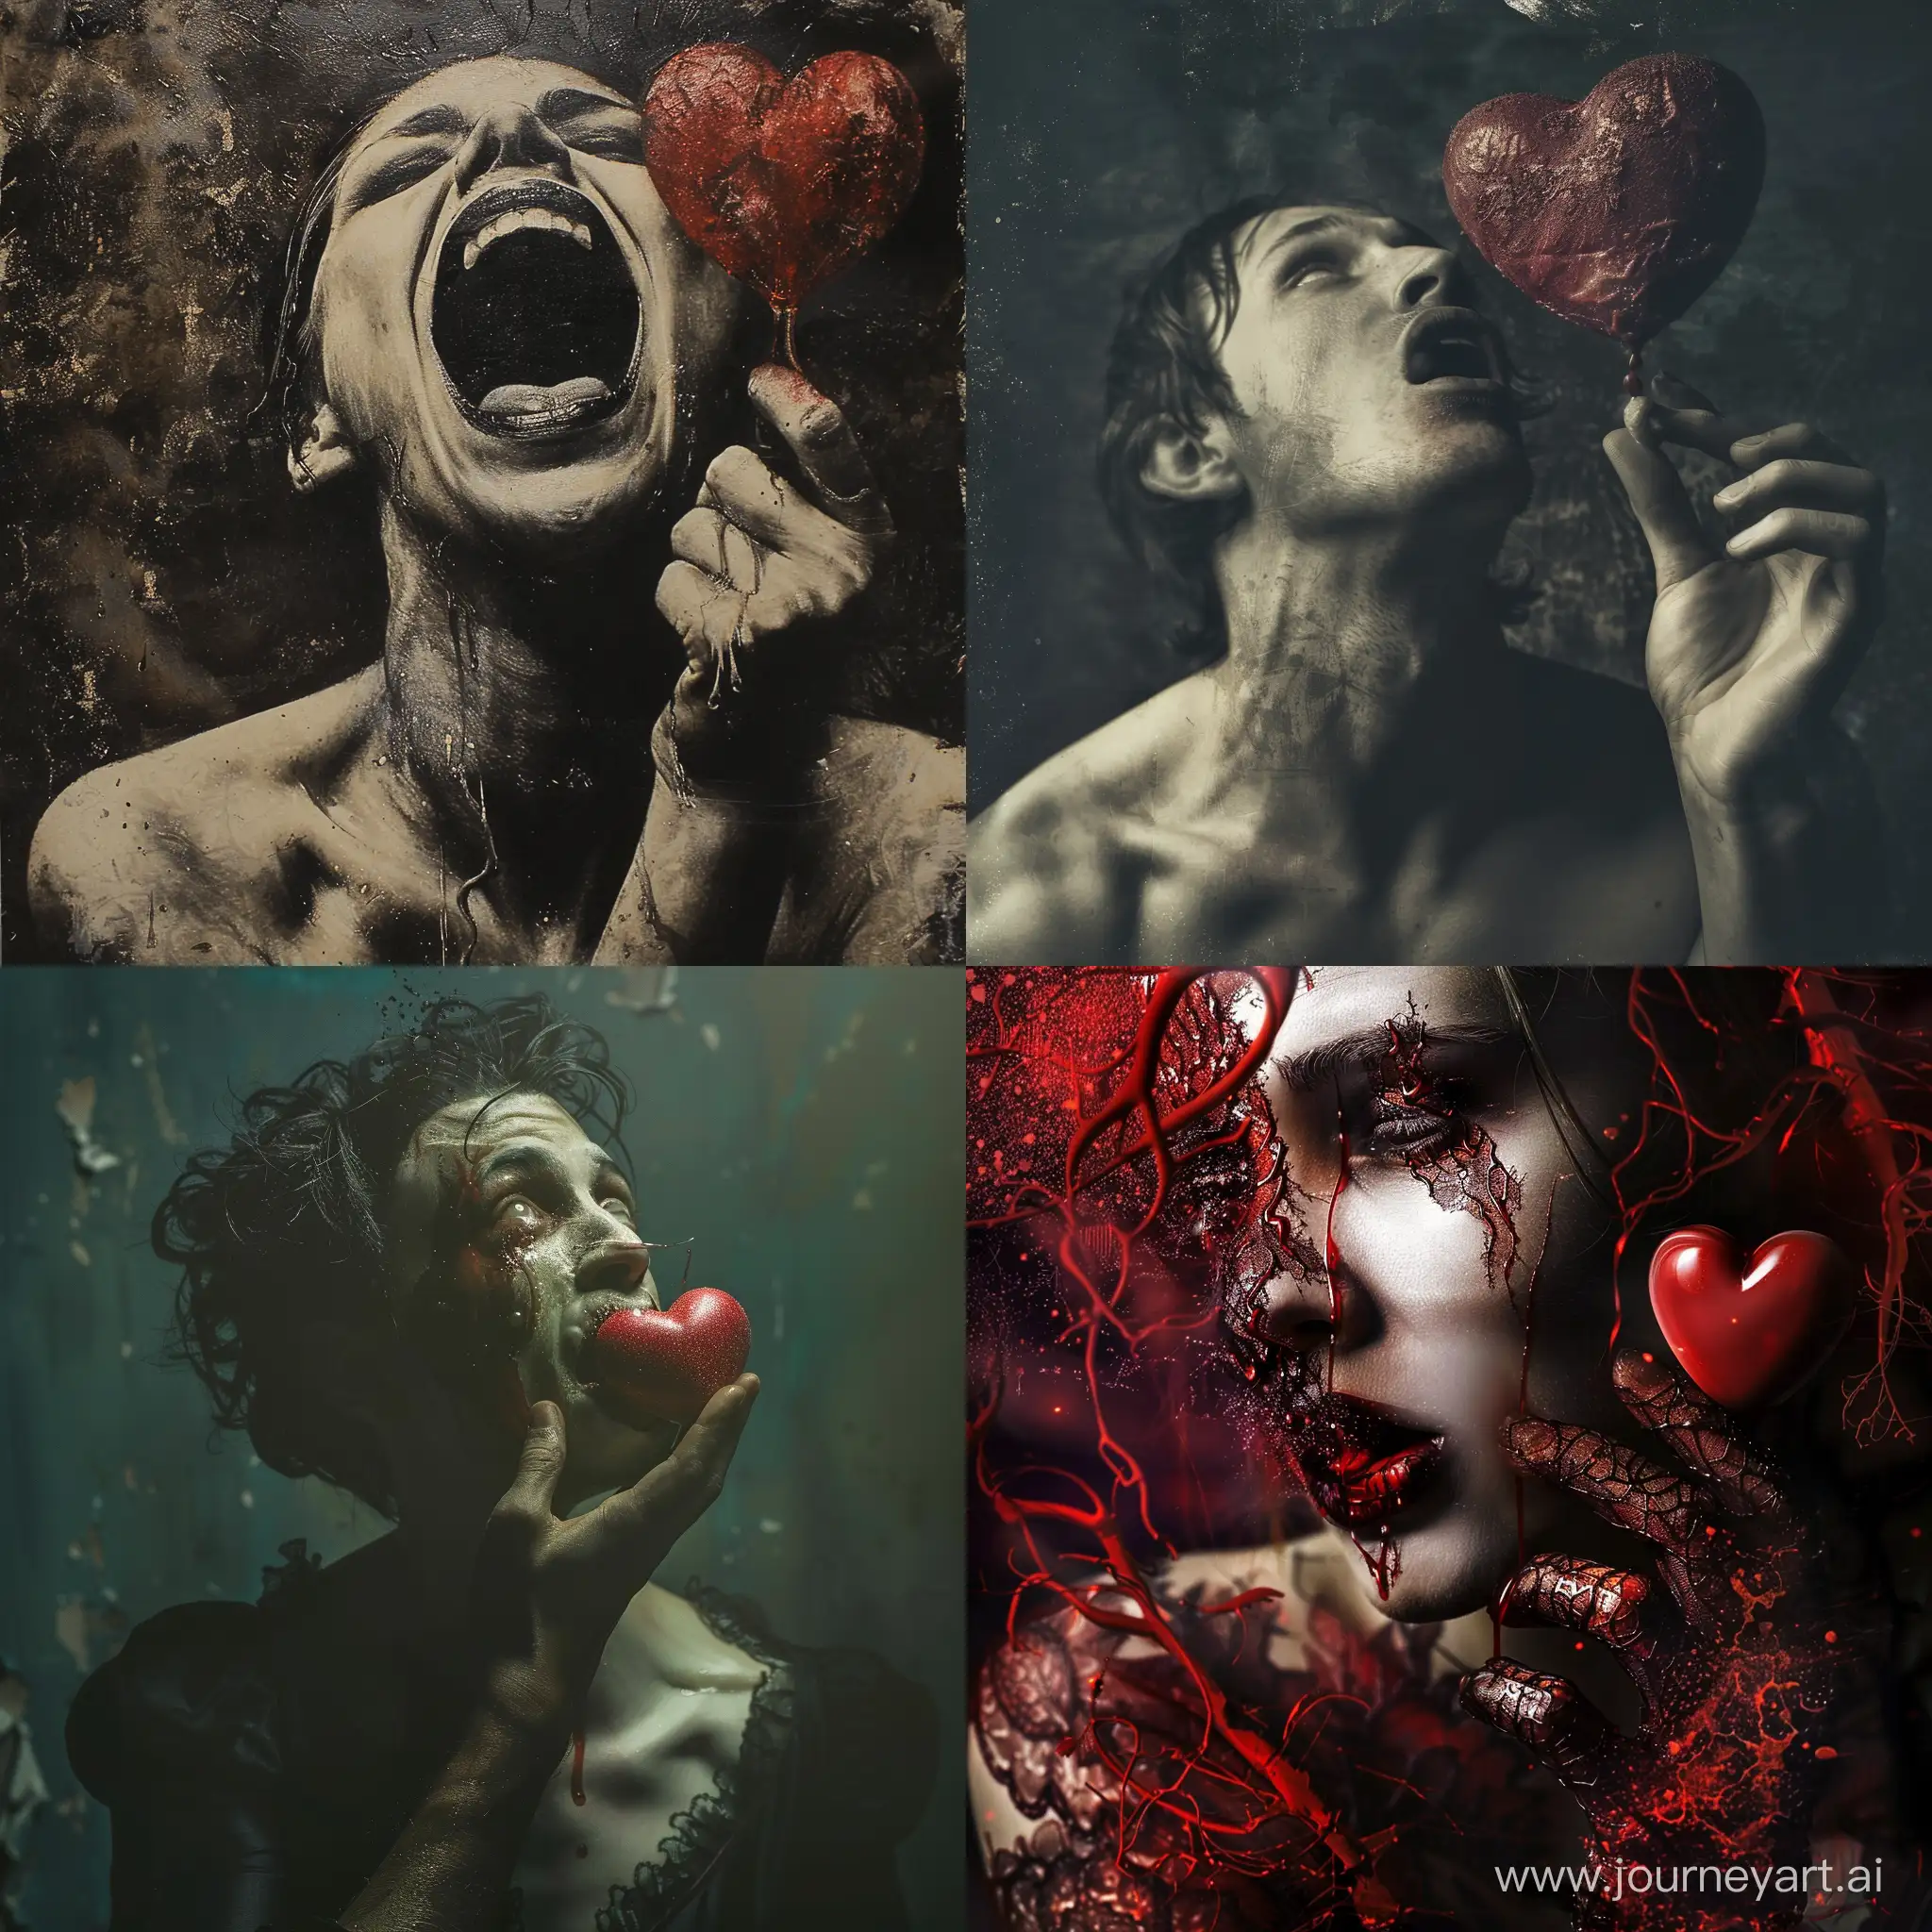 Surreal-Portrait-Man-Holding-Heart-Consuming-it-with-Distortion